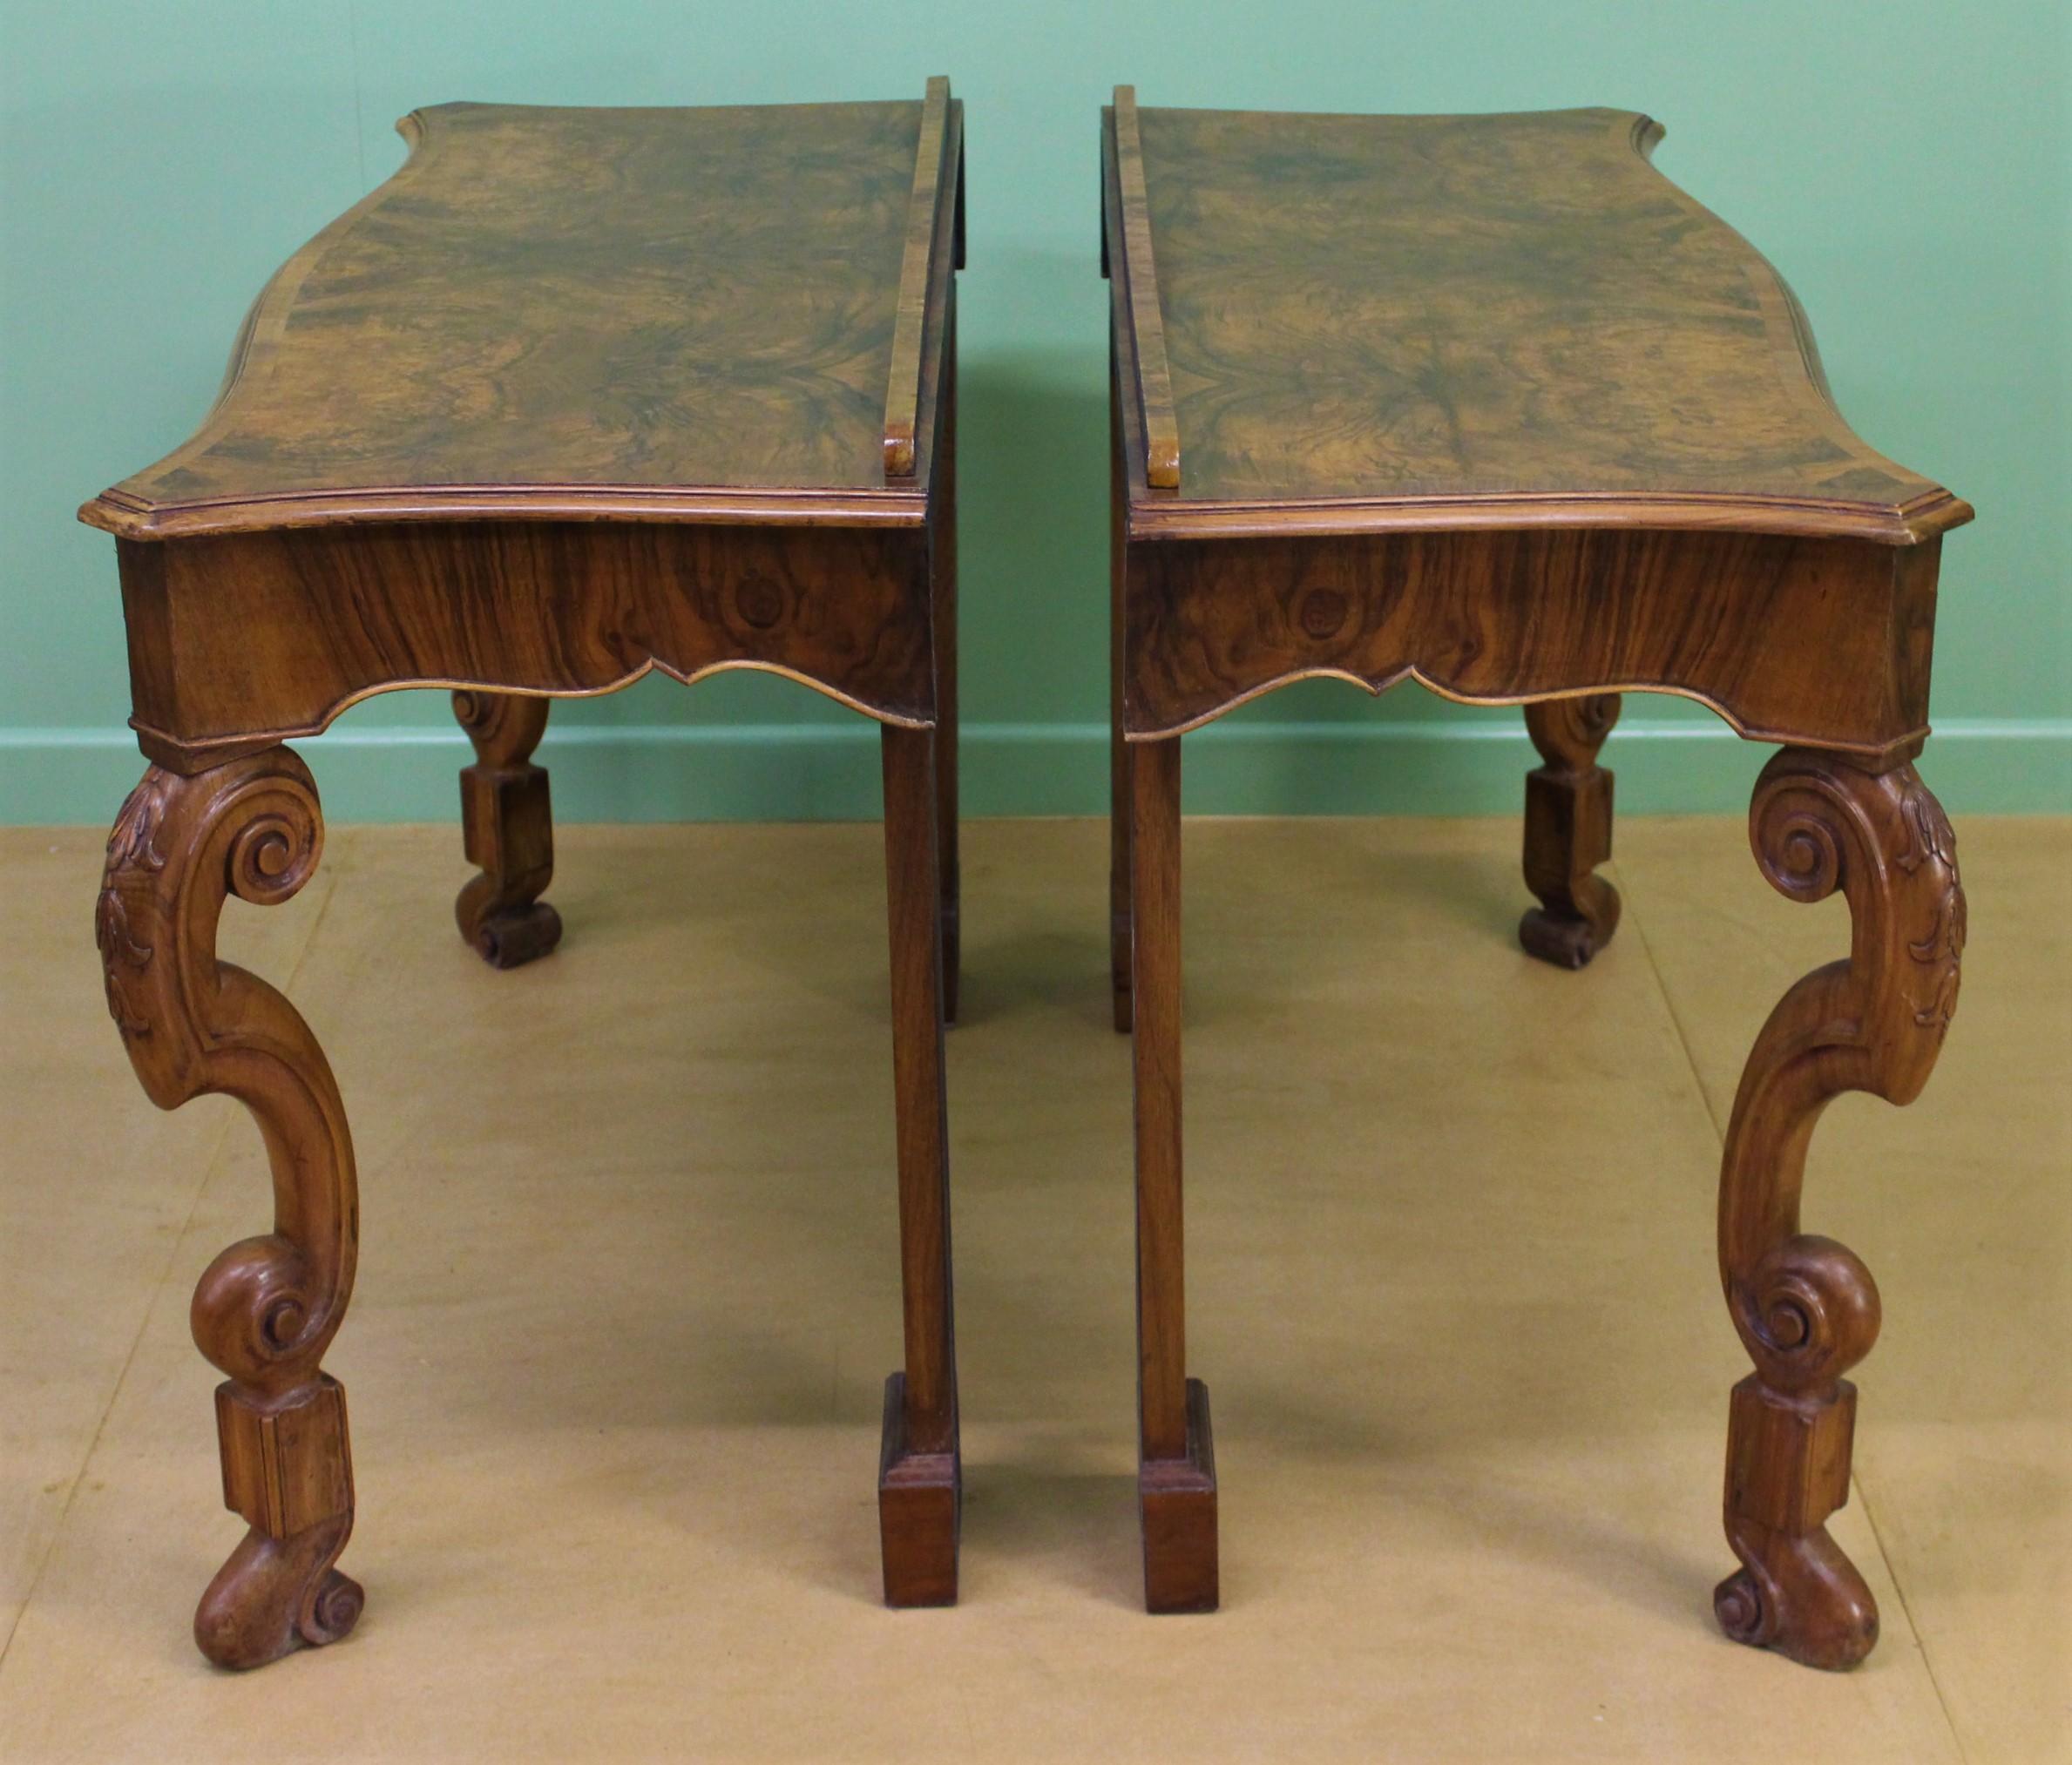 20th Century English Pair of Burr Walnut Console Tables